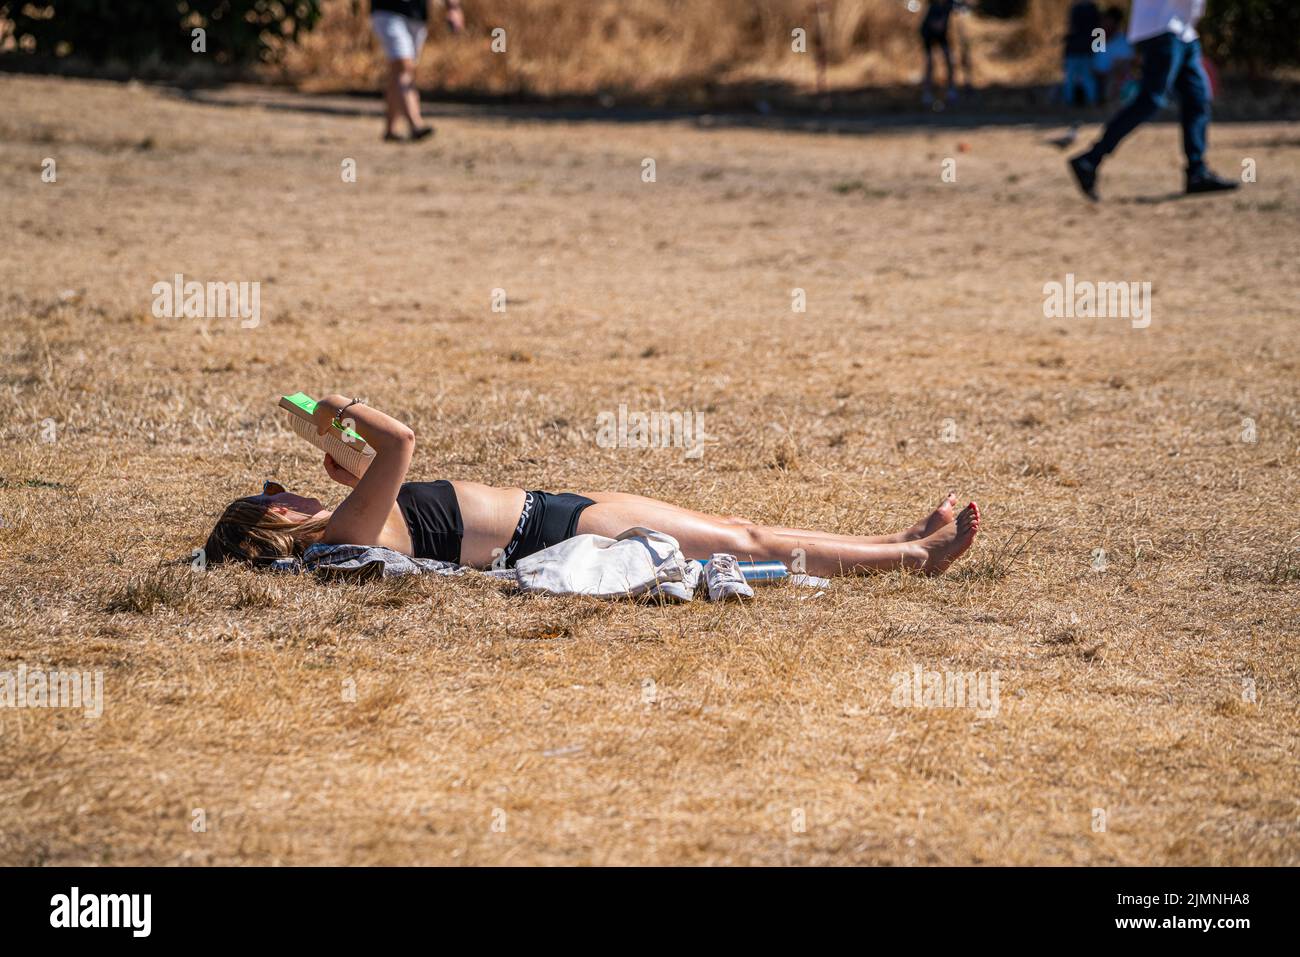 Wimbledon, London, UK. 7 August 2022  People are out enjoying the warm sunshine on a parched grass on Wimbledon Common  on another  hot day  as the UK's heatwave and drought continues into August, with temperatures expected to reach  above 30celsius  by next week Credit. amer ghazzal/Alamy Live News Stock Photo